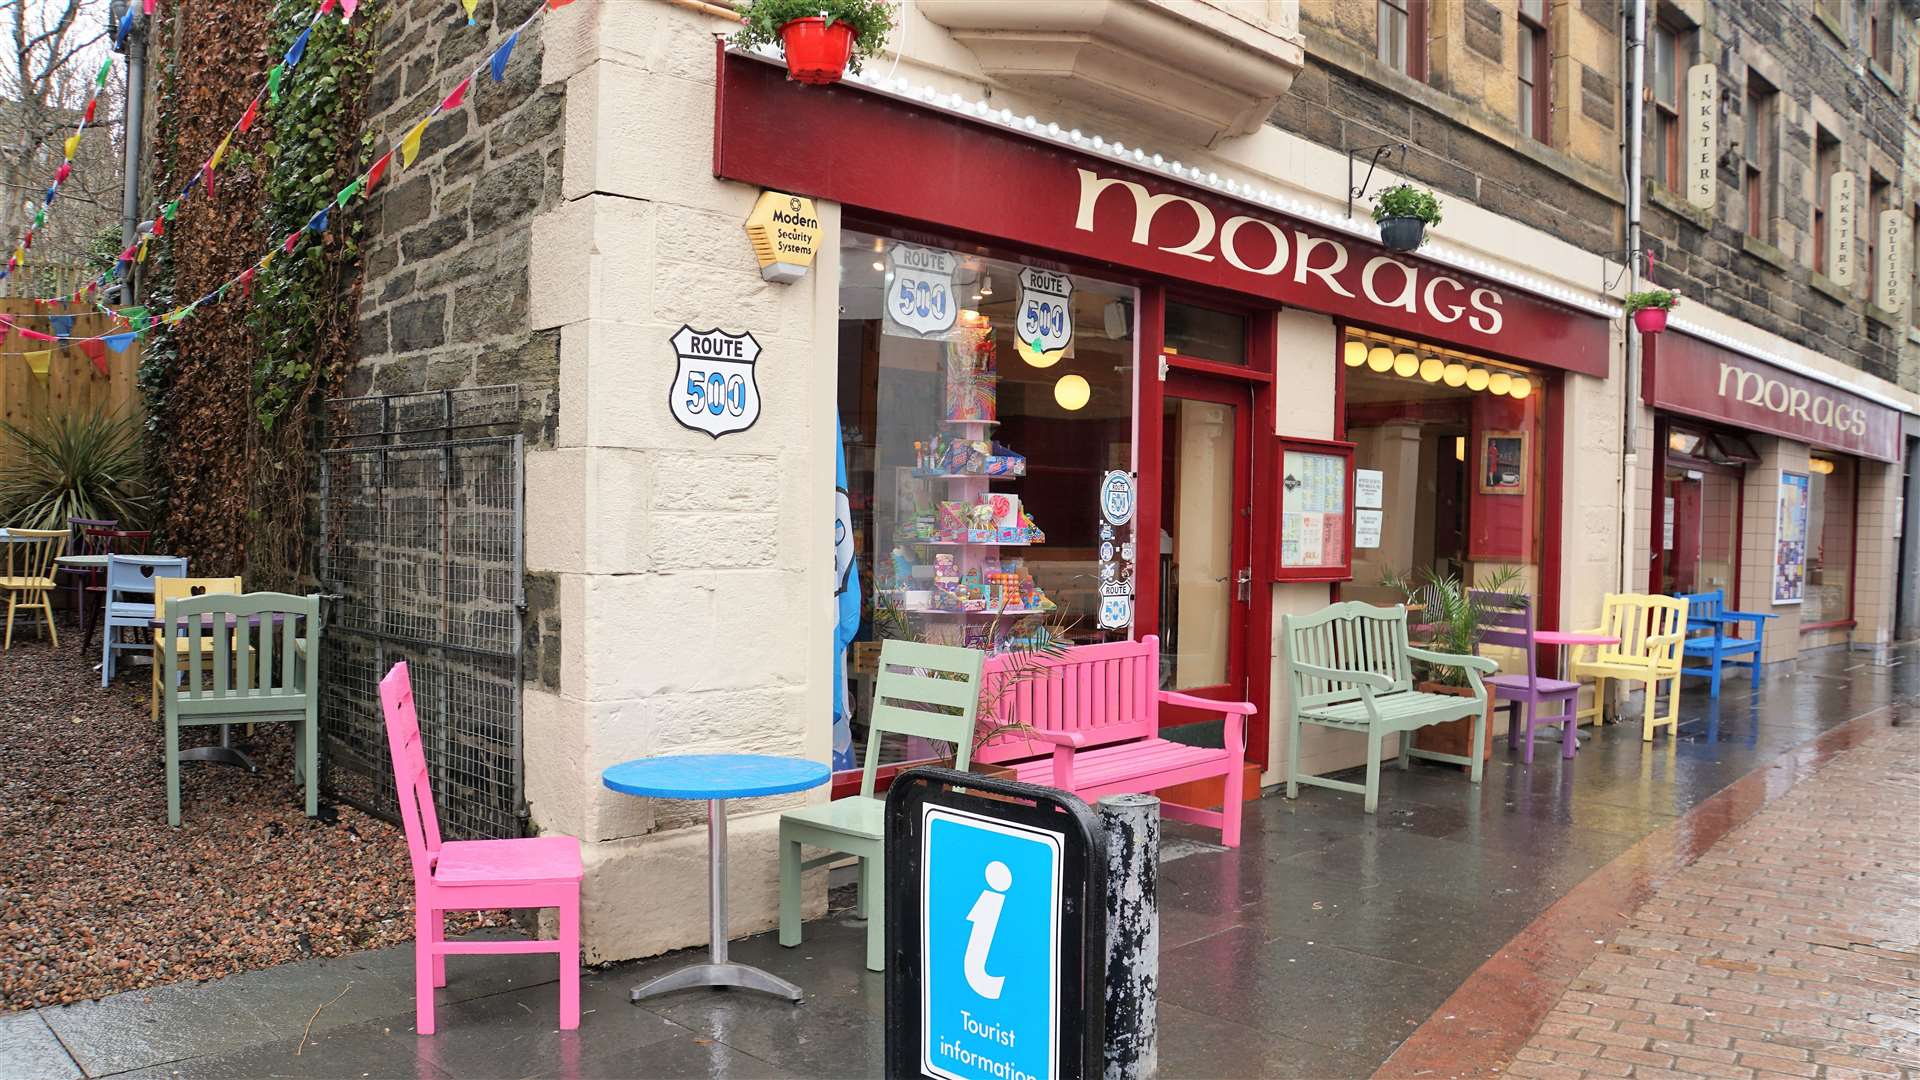 Morags Cafe on Wick's High Street had its first seated customers in a while.